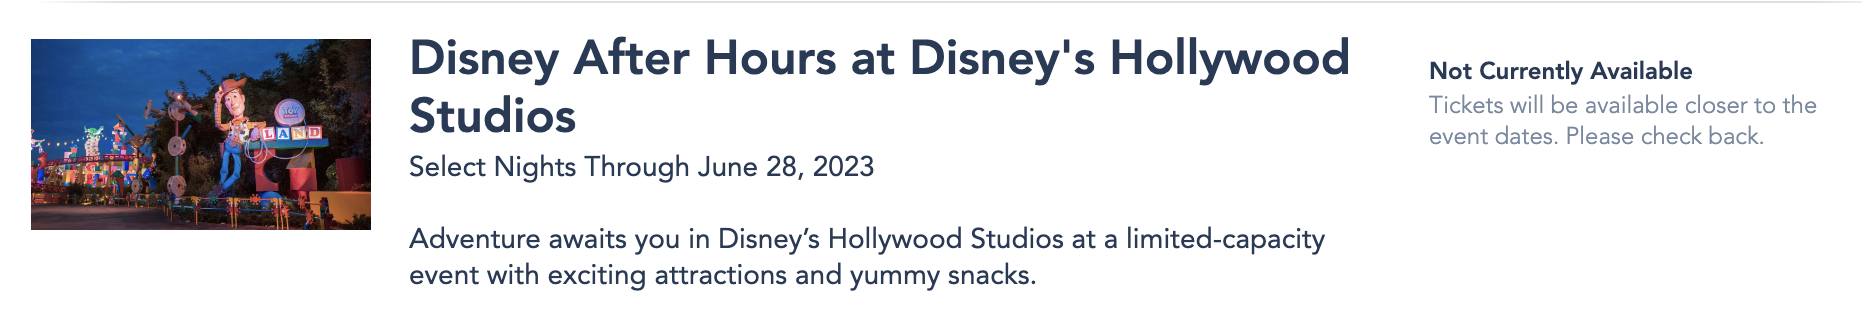 after hours sold out dhs